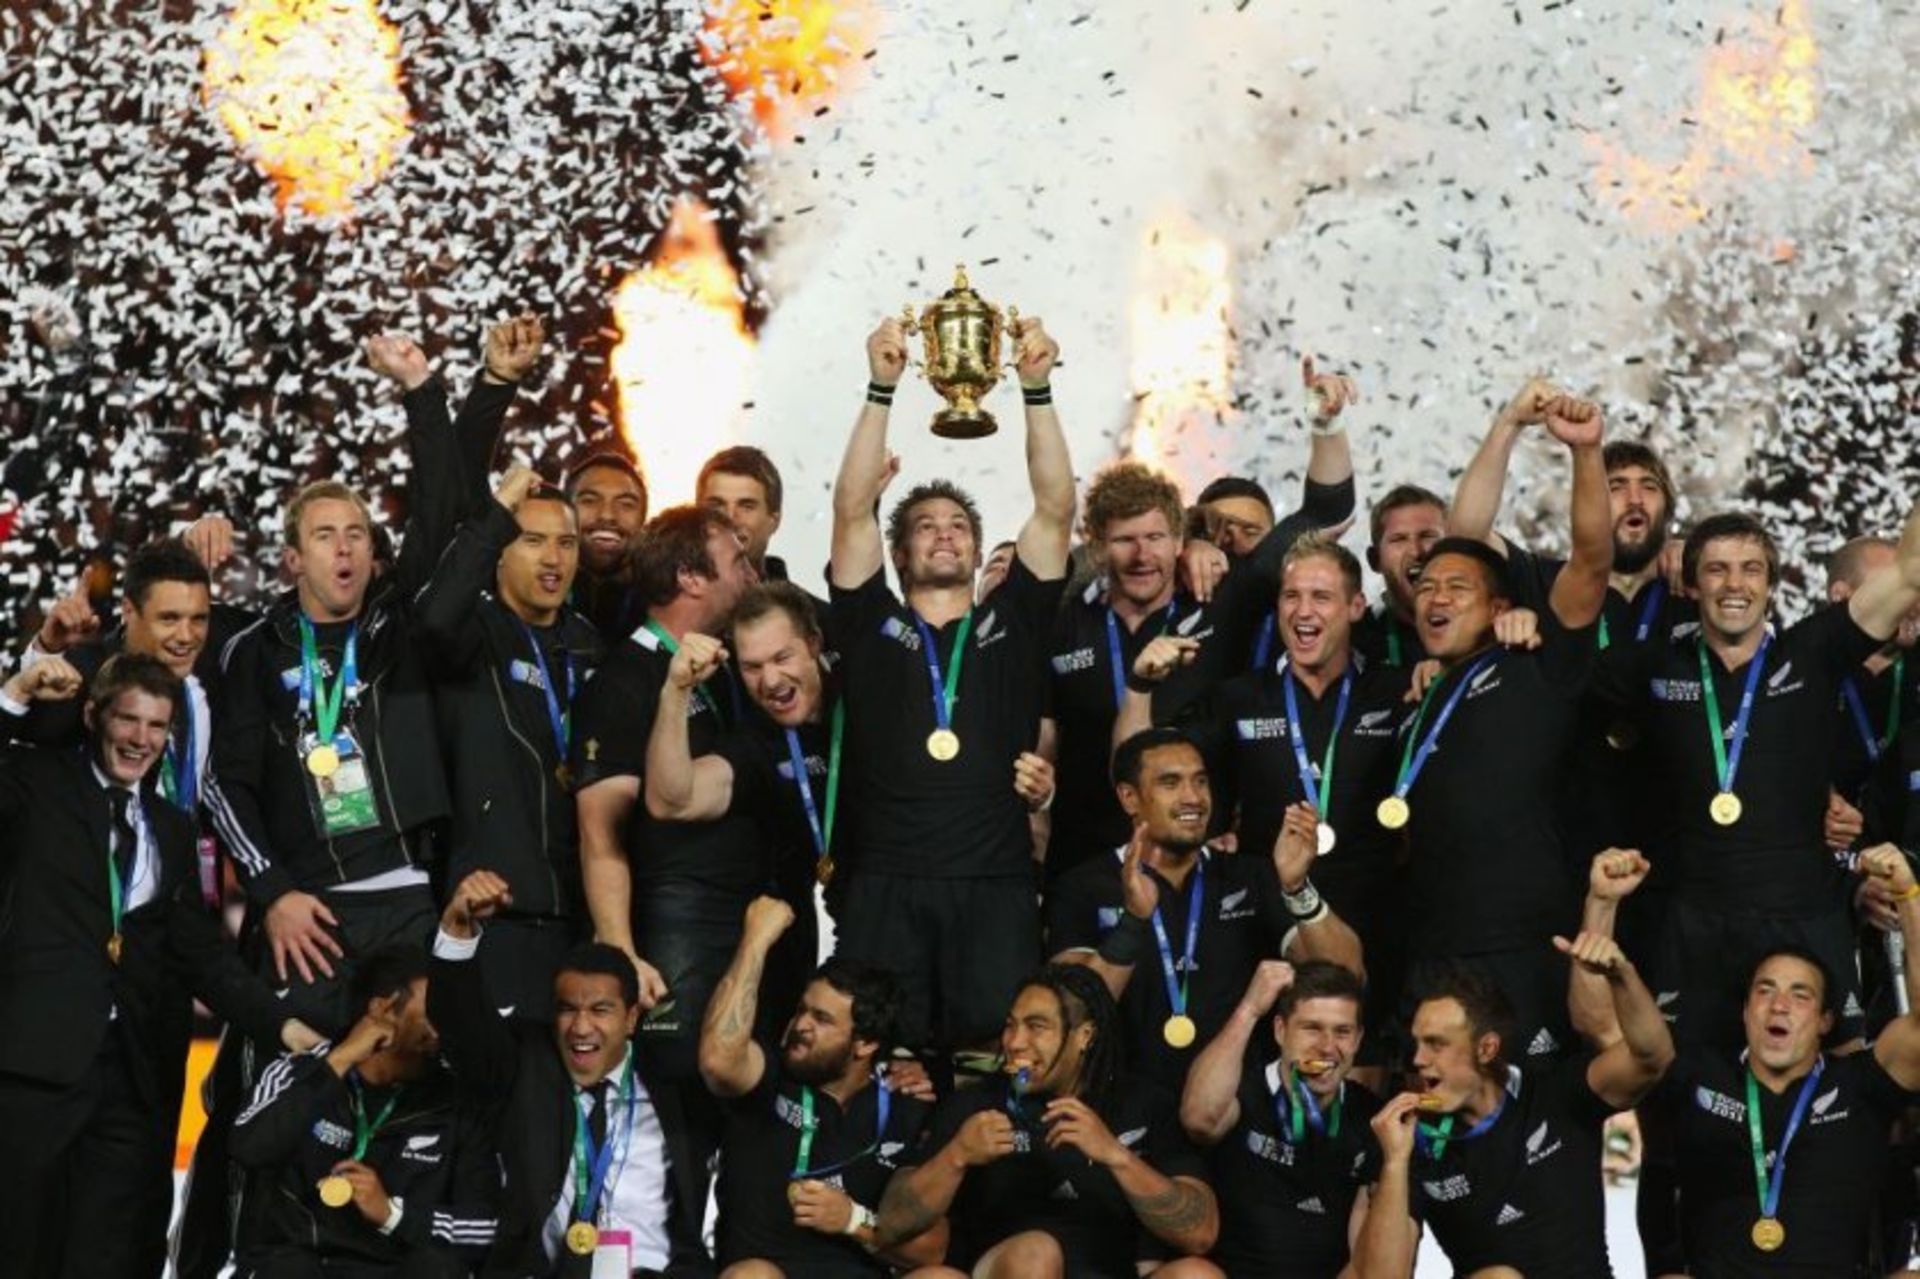 Renowned artist Ben Mosley original ‘The Haka’ painting to mark the ‘All Black’s’ winning RWC 2015 - Image 2 of 2